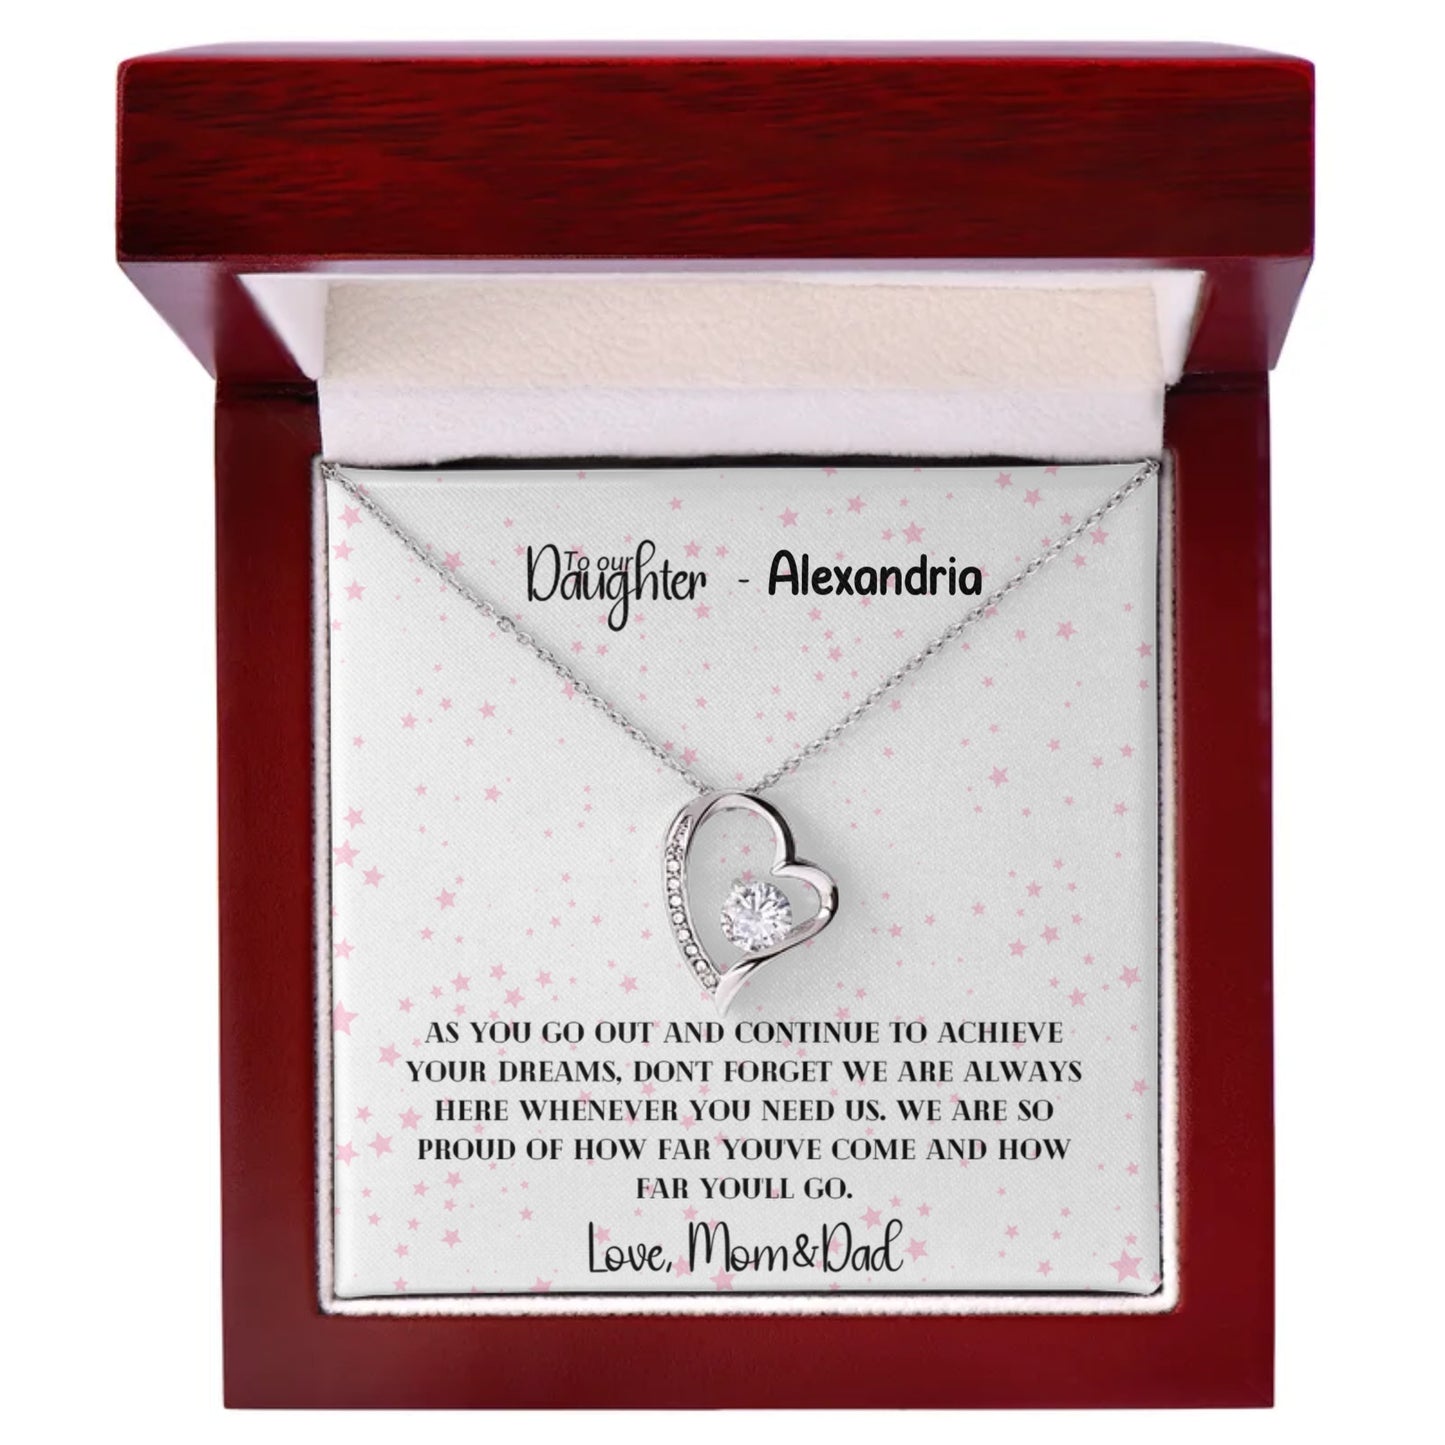 To Daughter, Love Mom/Dad - Don't forget we are always here | Forever Love Heart Necklace | Personalize